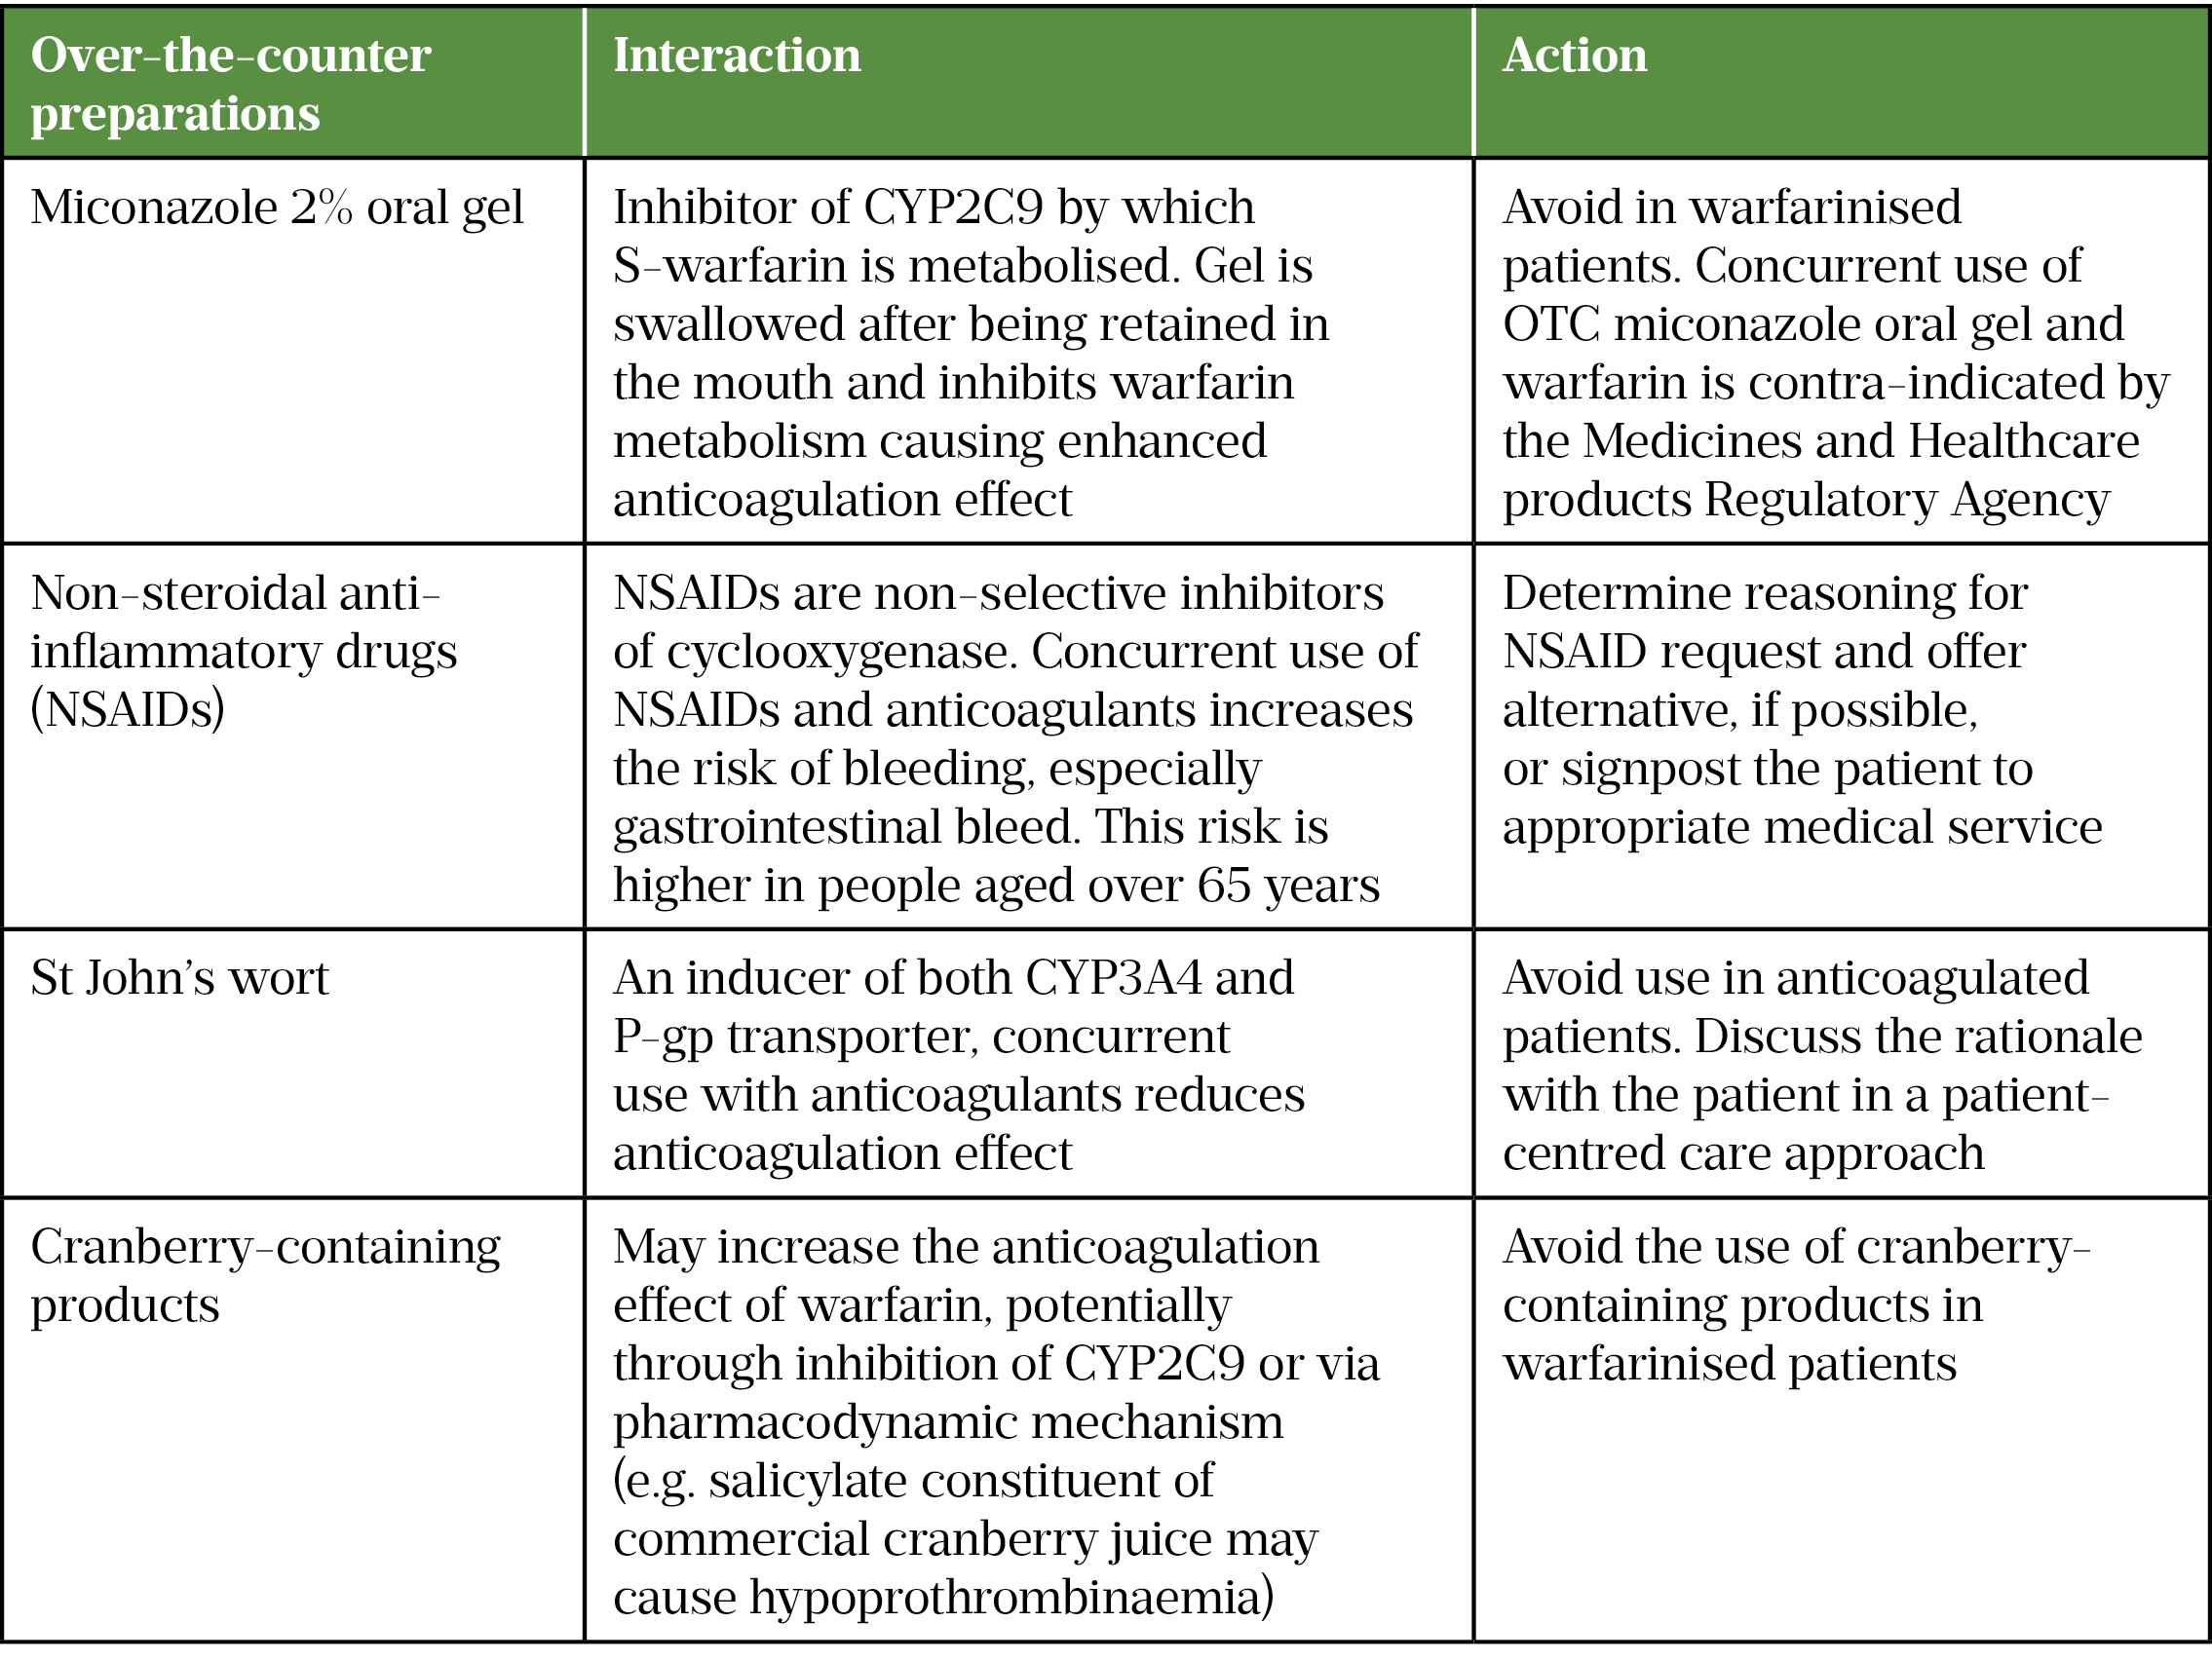 Table 4: Interactions between over-the-counter preparations and anticoagulants